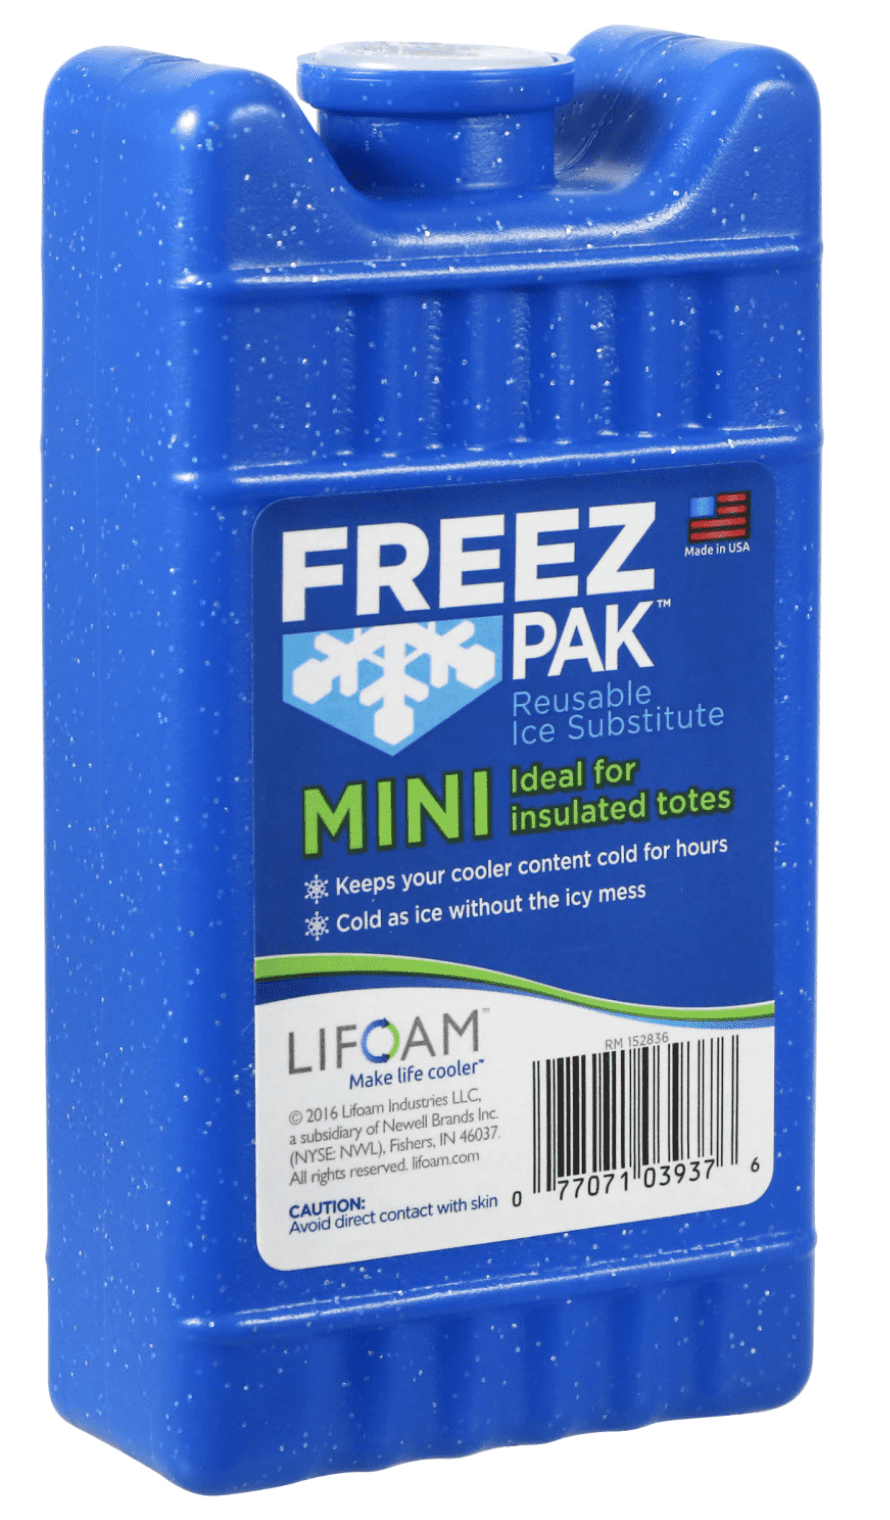 Cryopak Large Ice Pack - One Large Size Ice Pack - 8 Inches Tall X 8 Inches  Wide X 1 Inches Deep - Perfect Ice Packs for Coolers - Great Value!